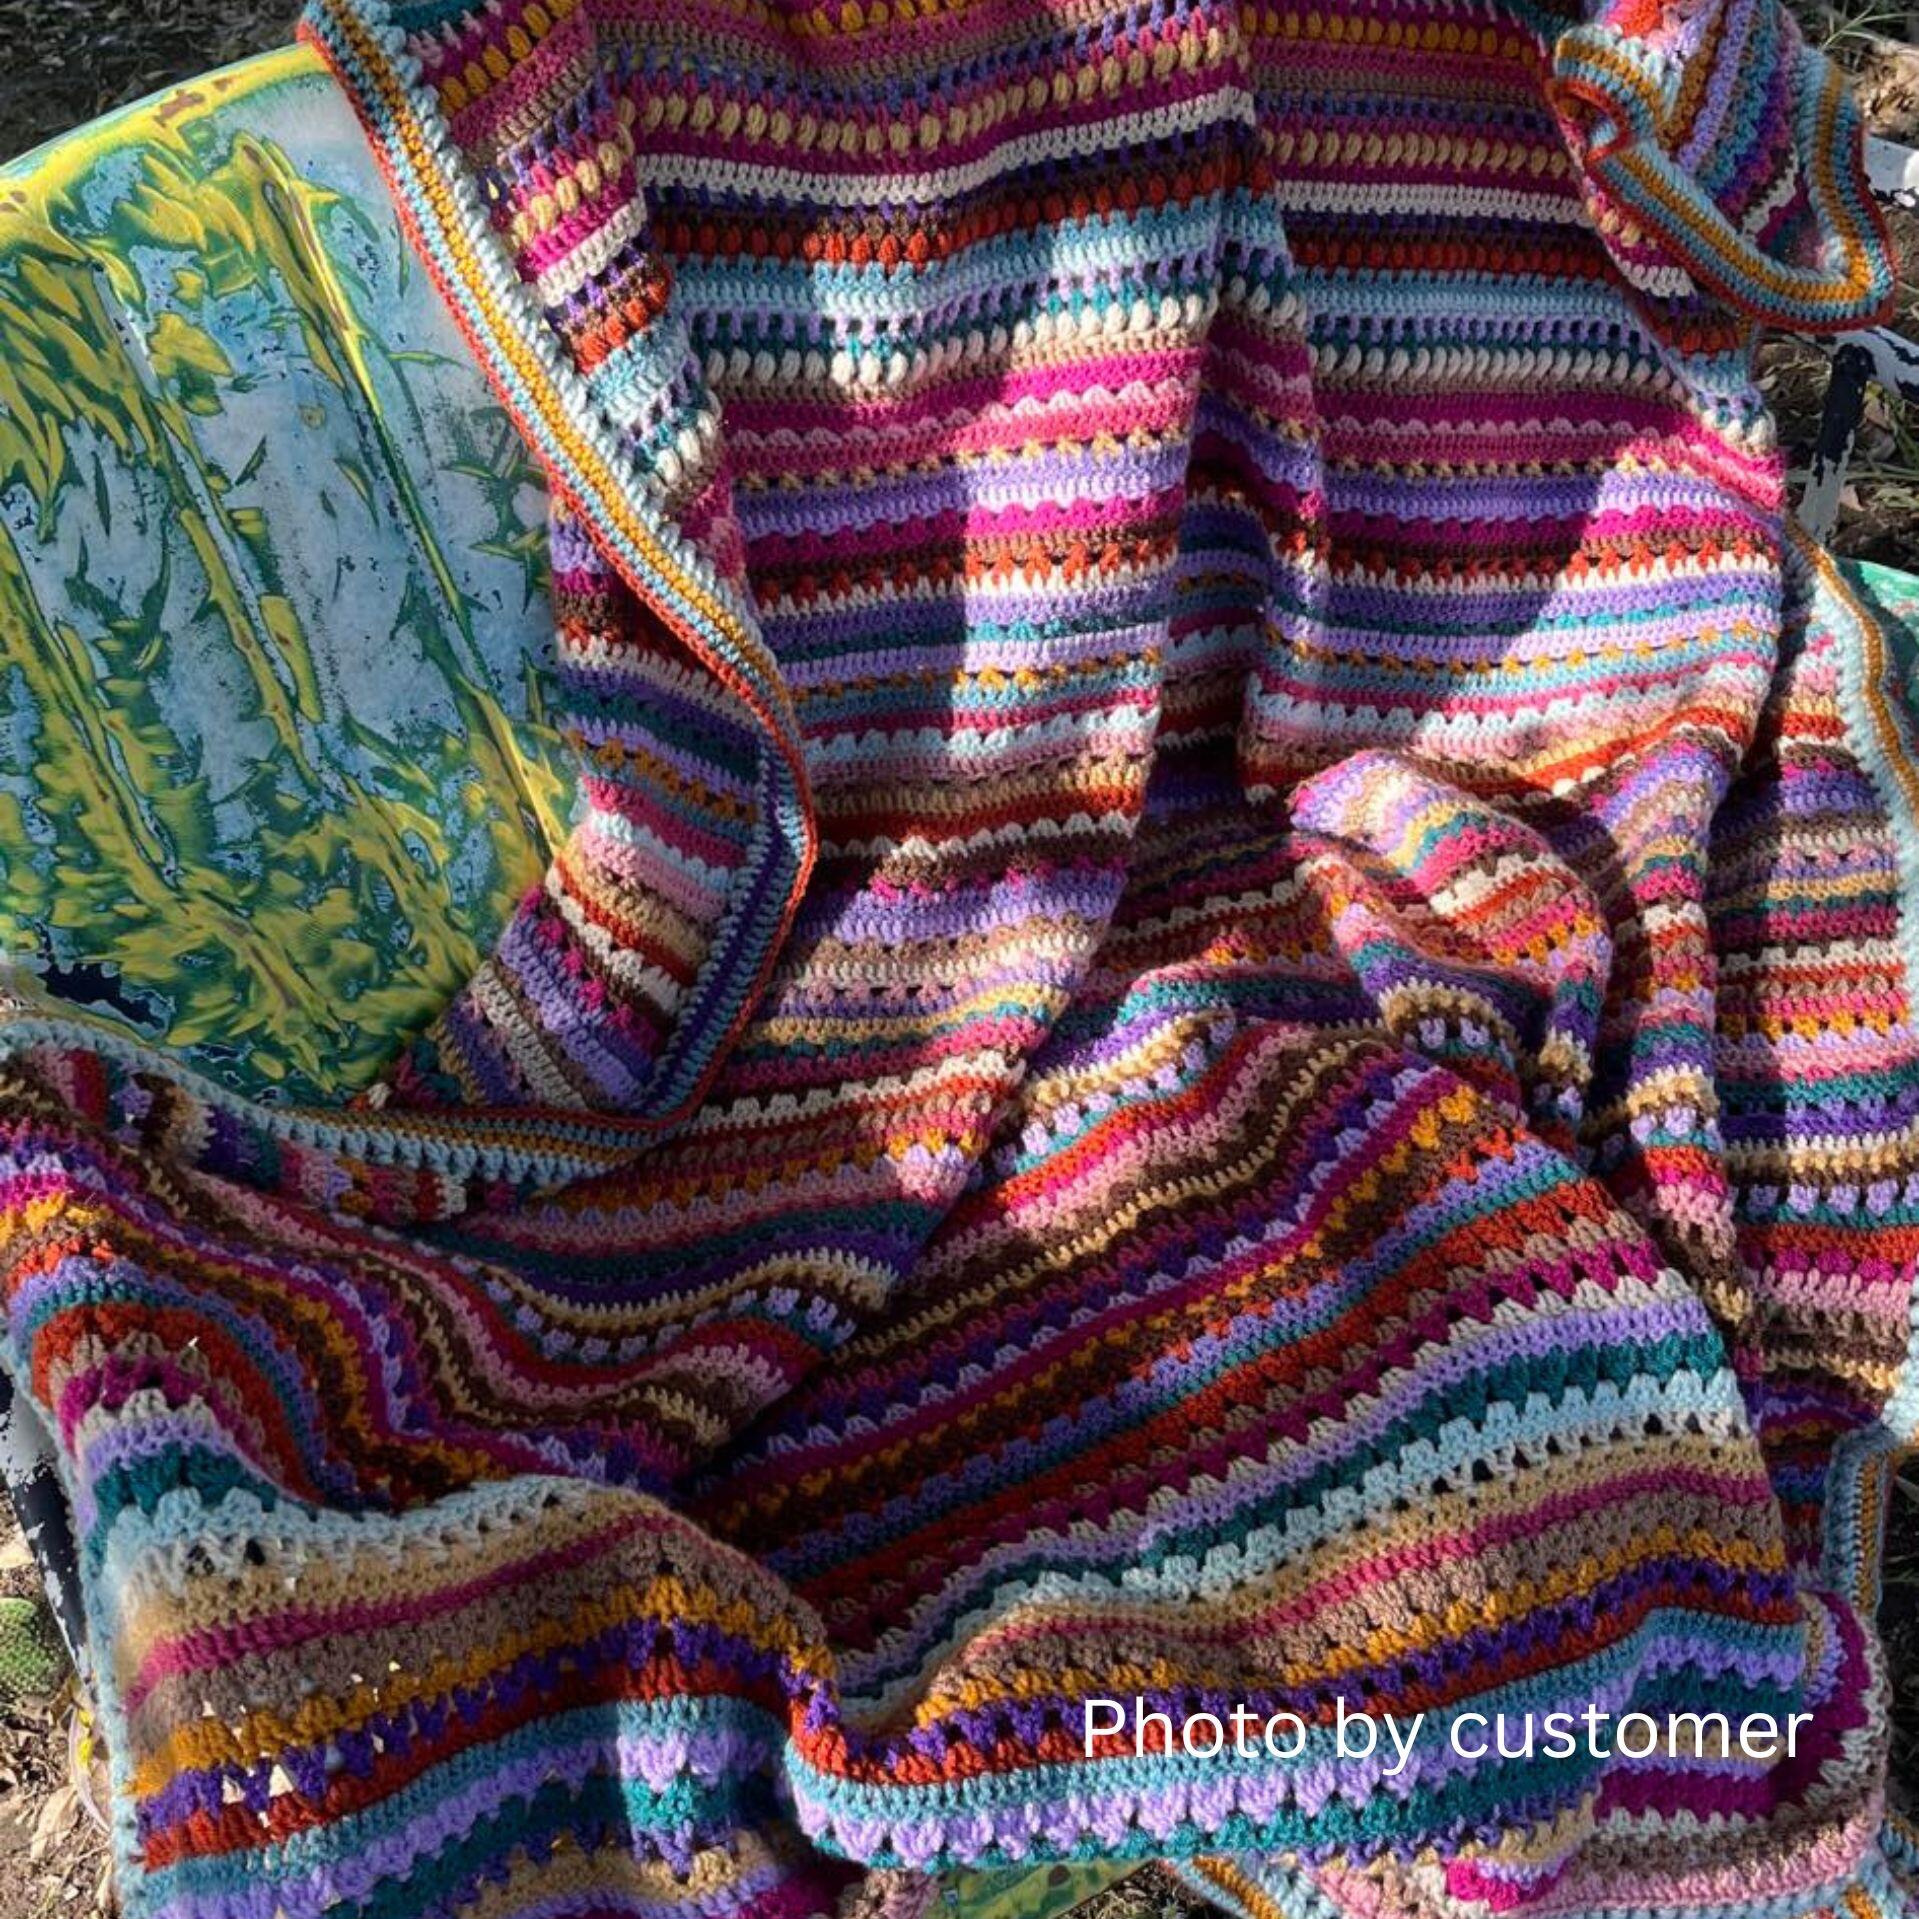 Greenway CAL blanket photographed outside by customer